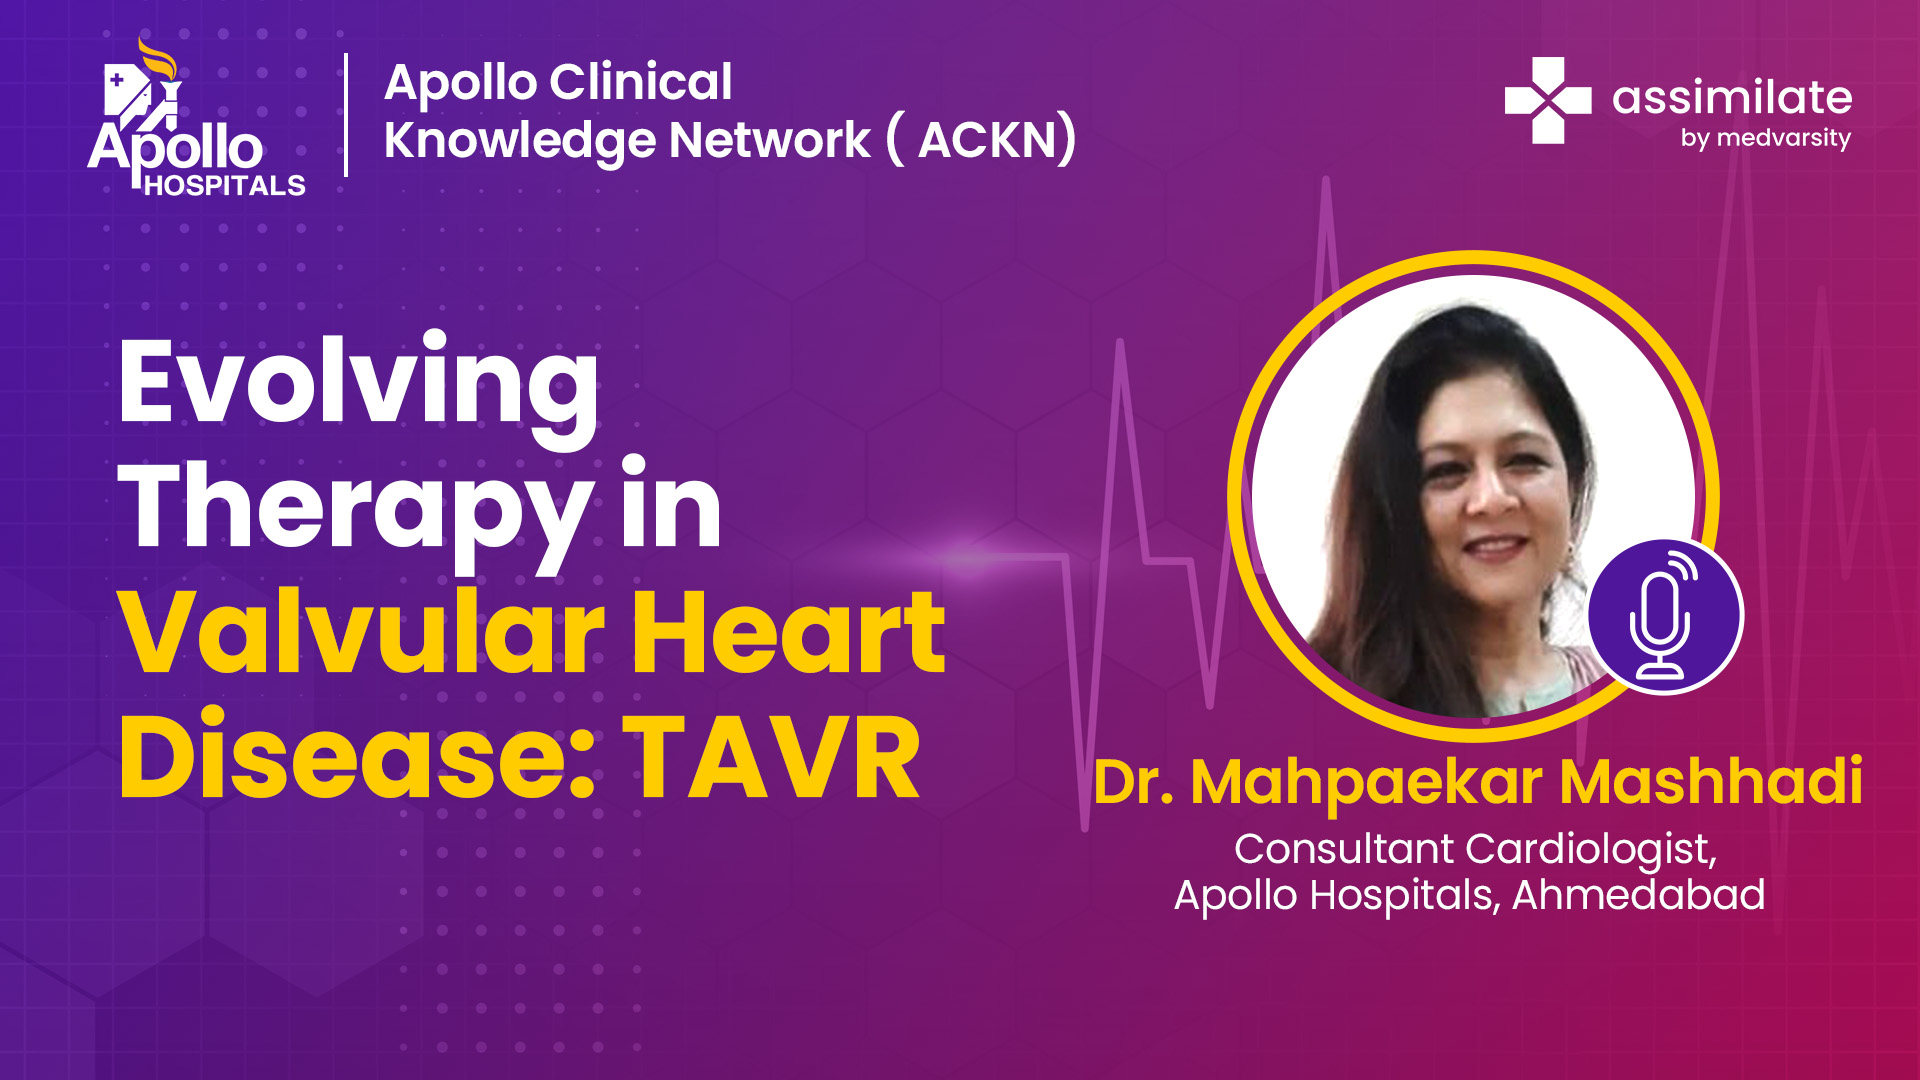 Evolving Therapy in Valvular Heart Disease: TAVR